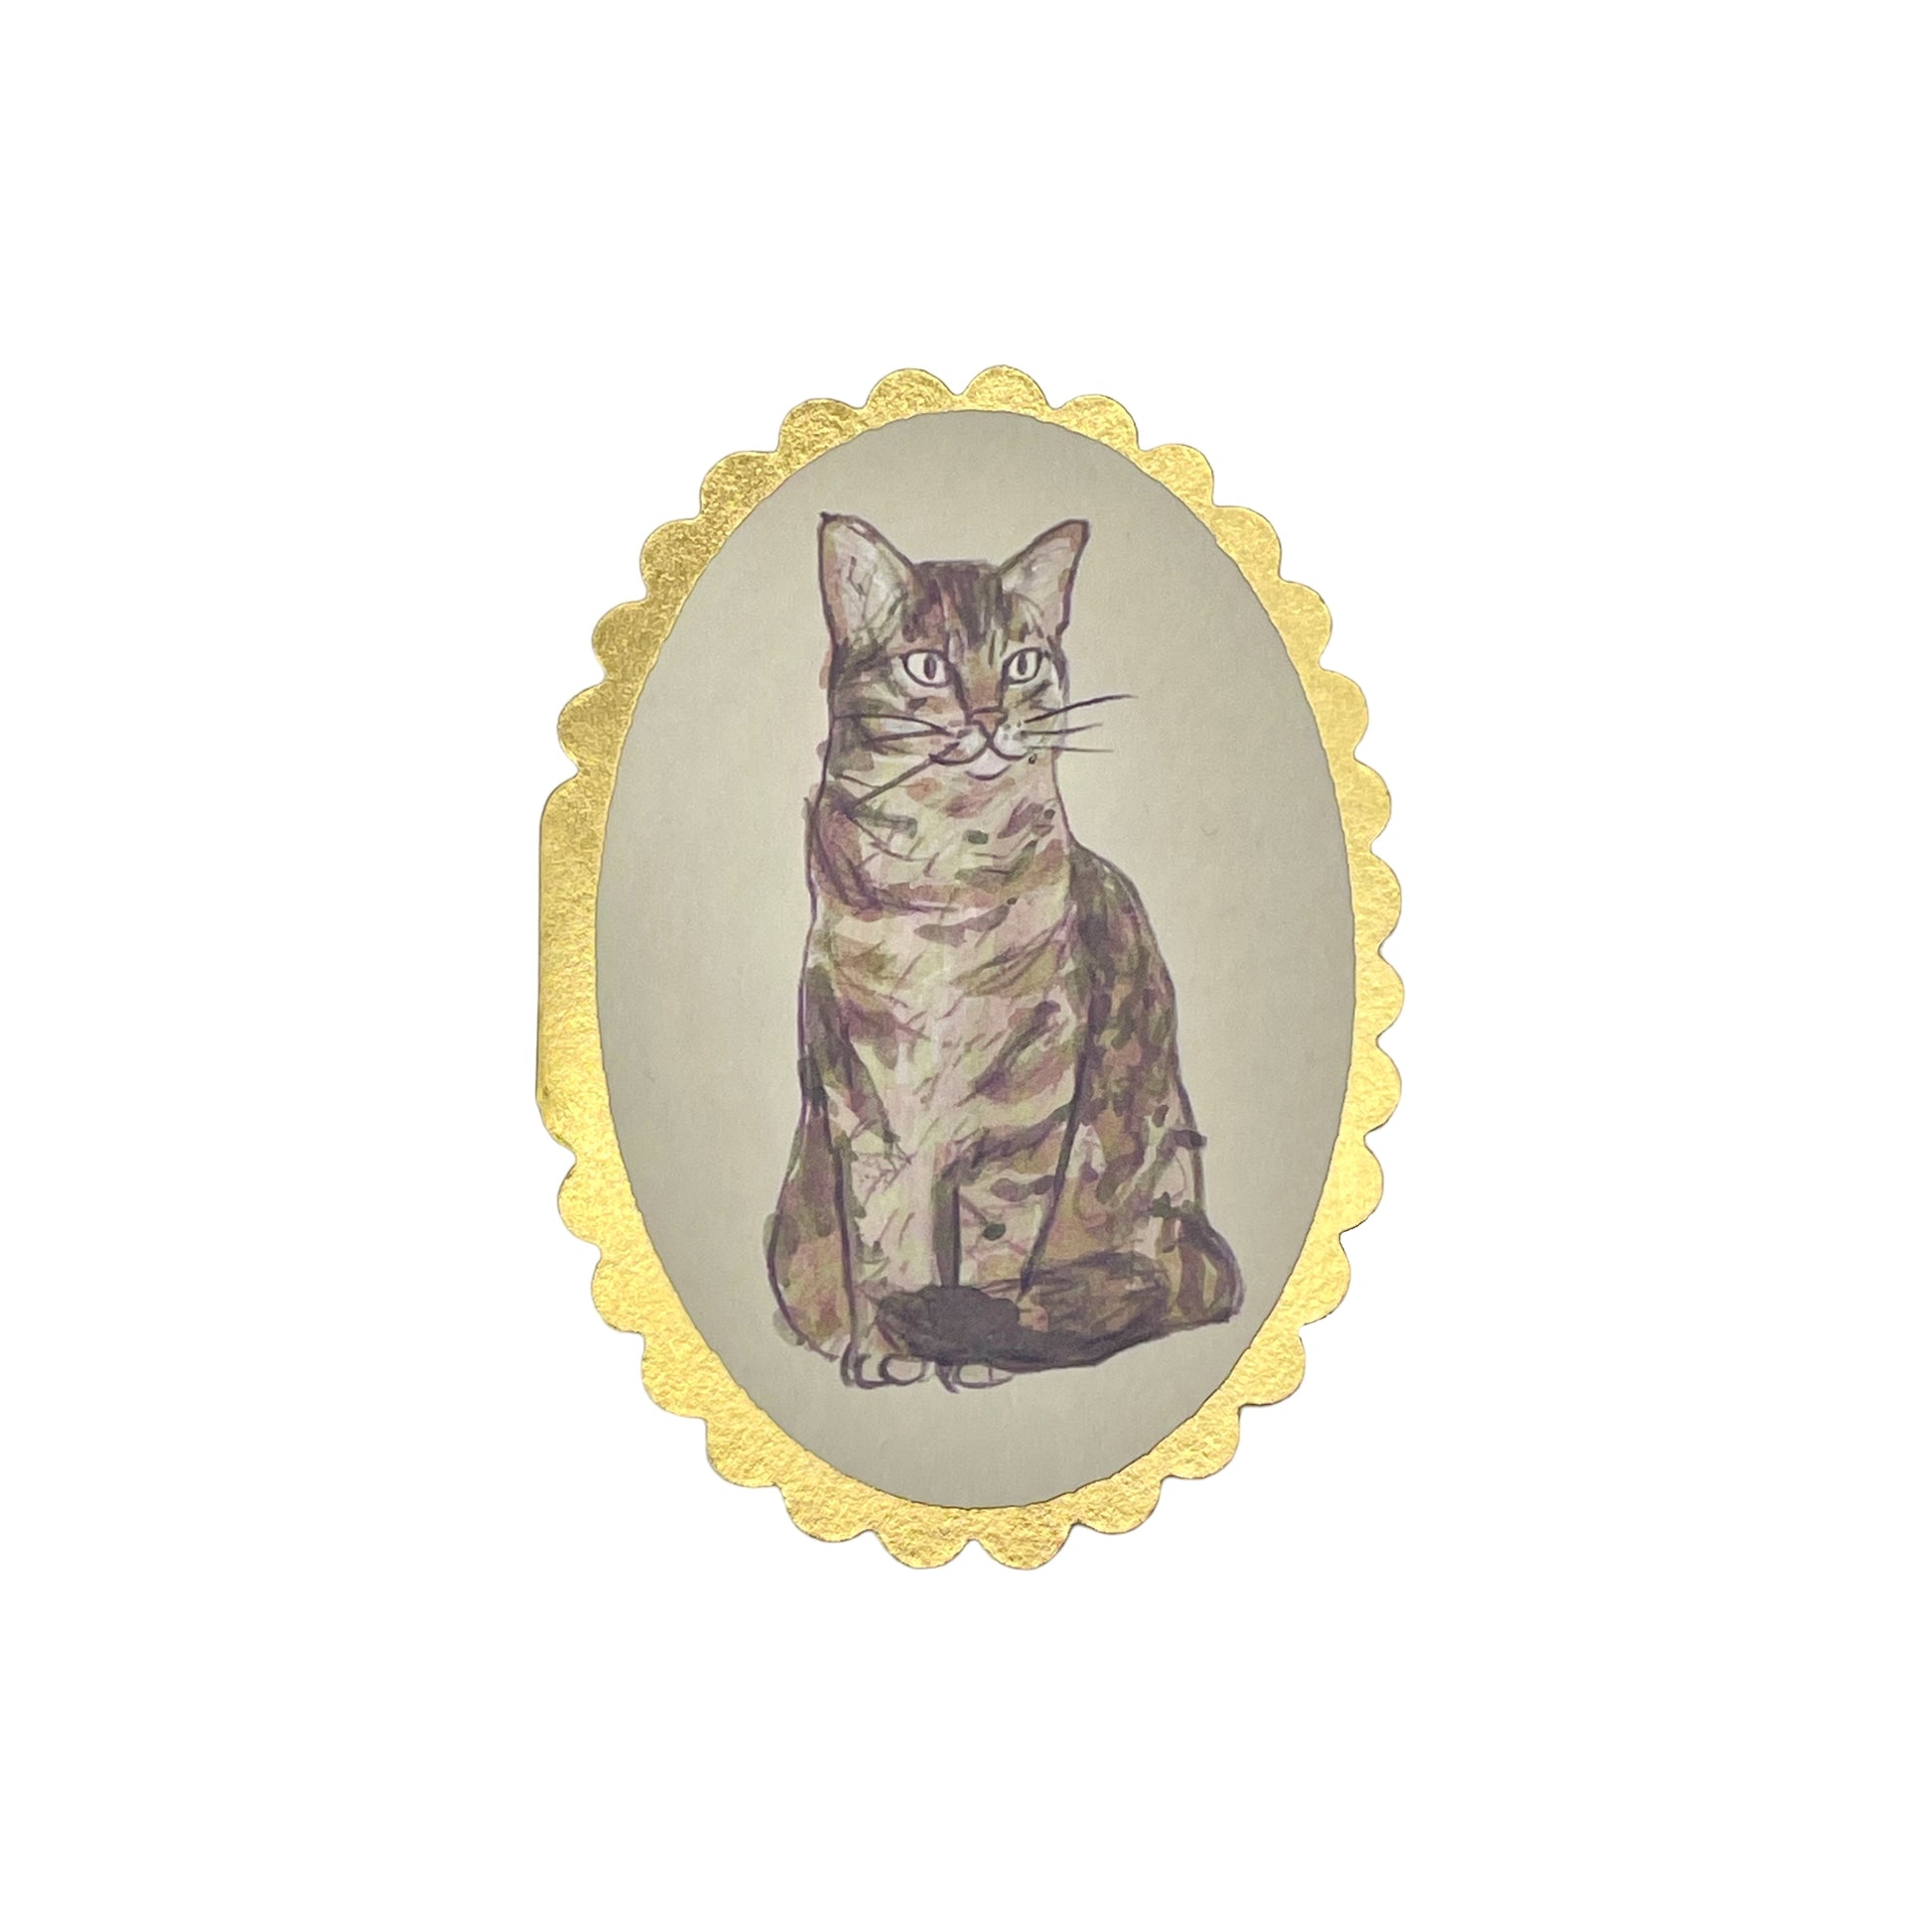 small oval greetings card with a drawing of a tabby cat.  the card has a gold foiled scalloped edge. By Wanderlust